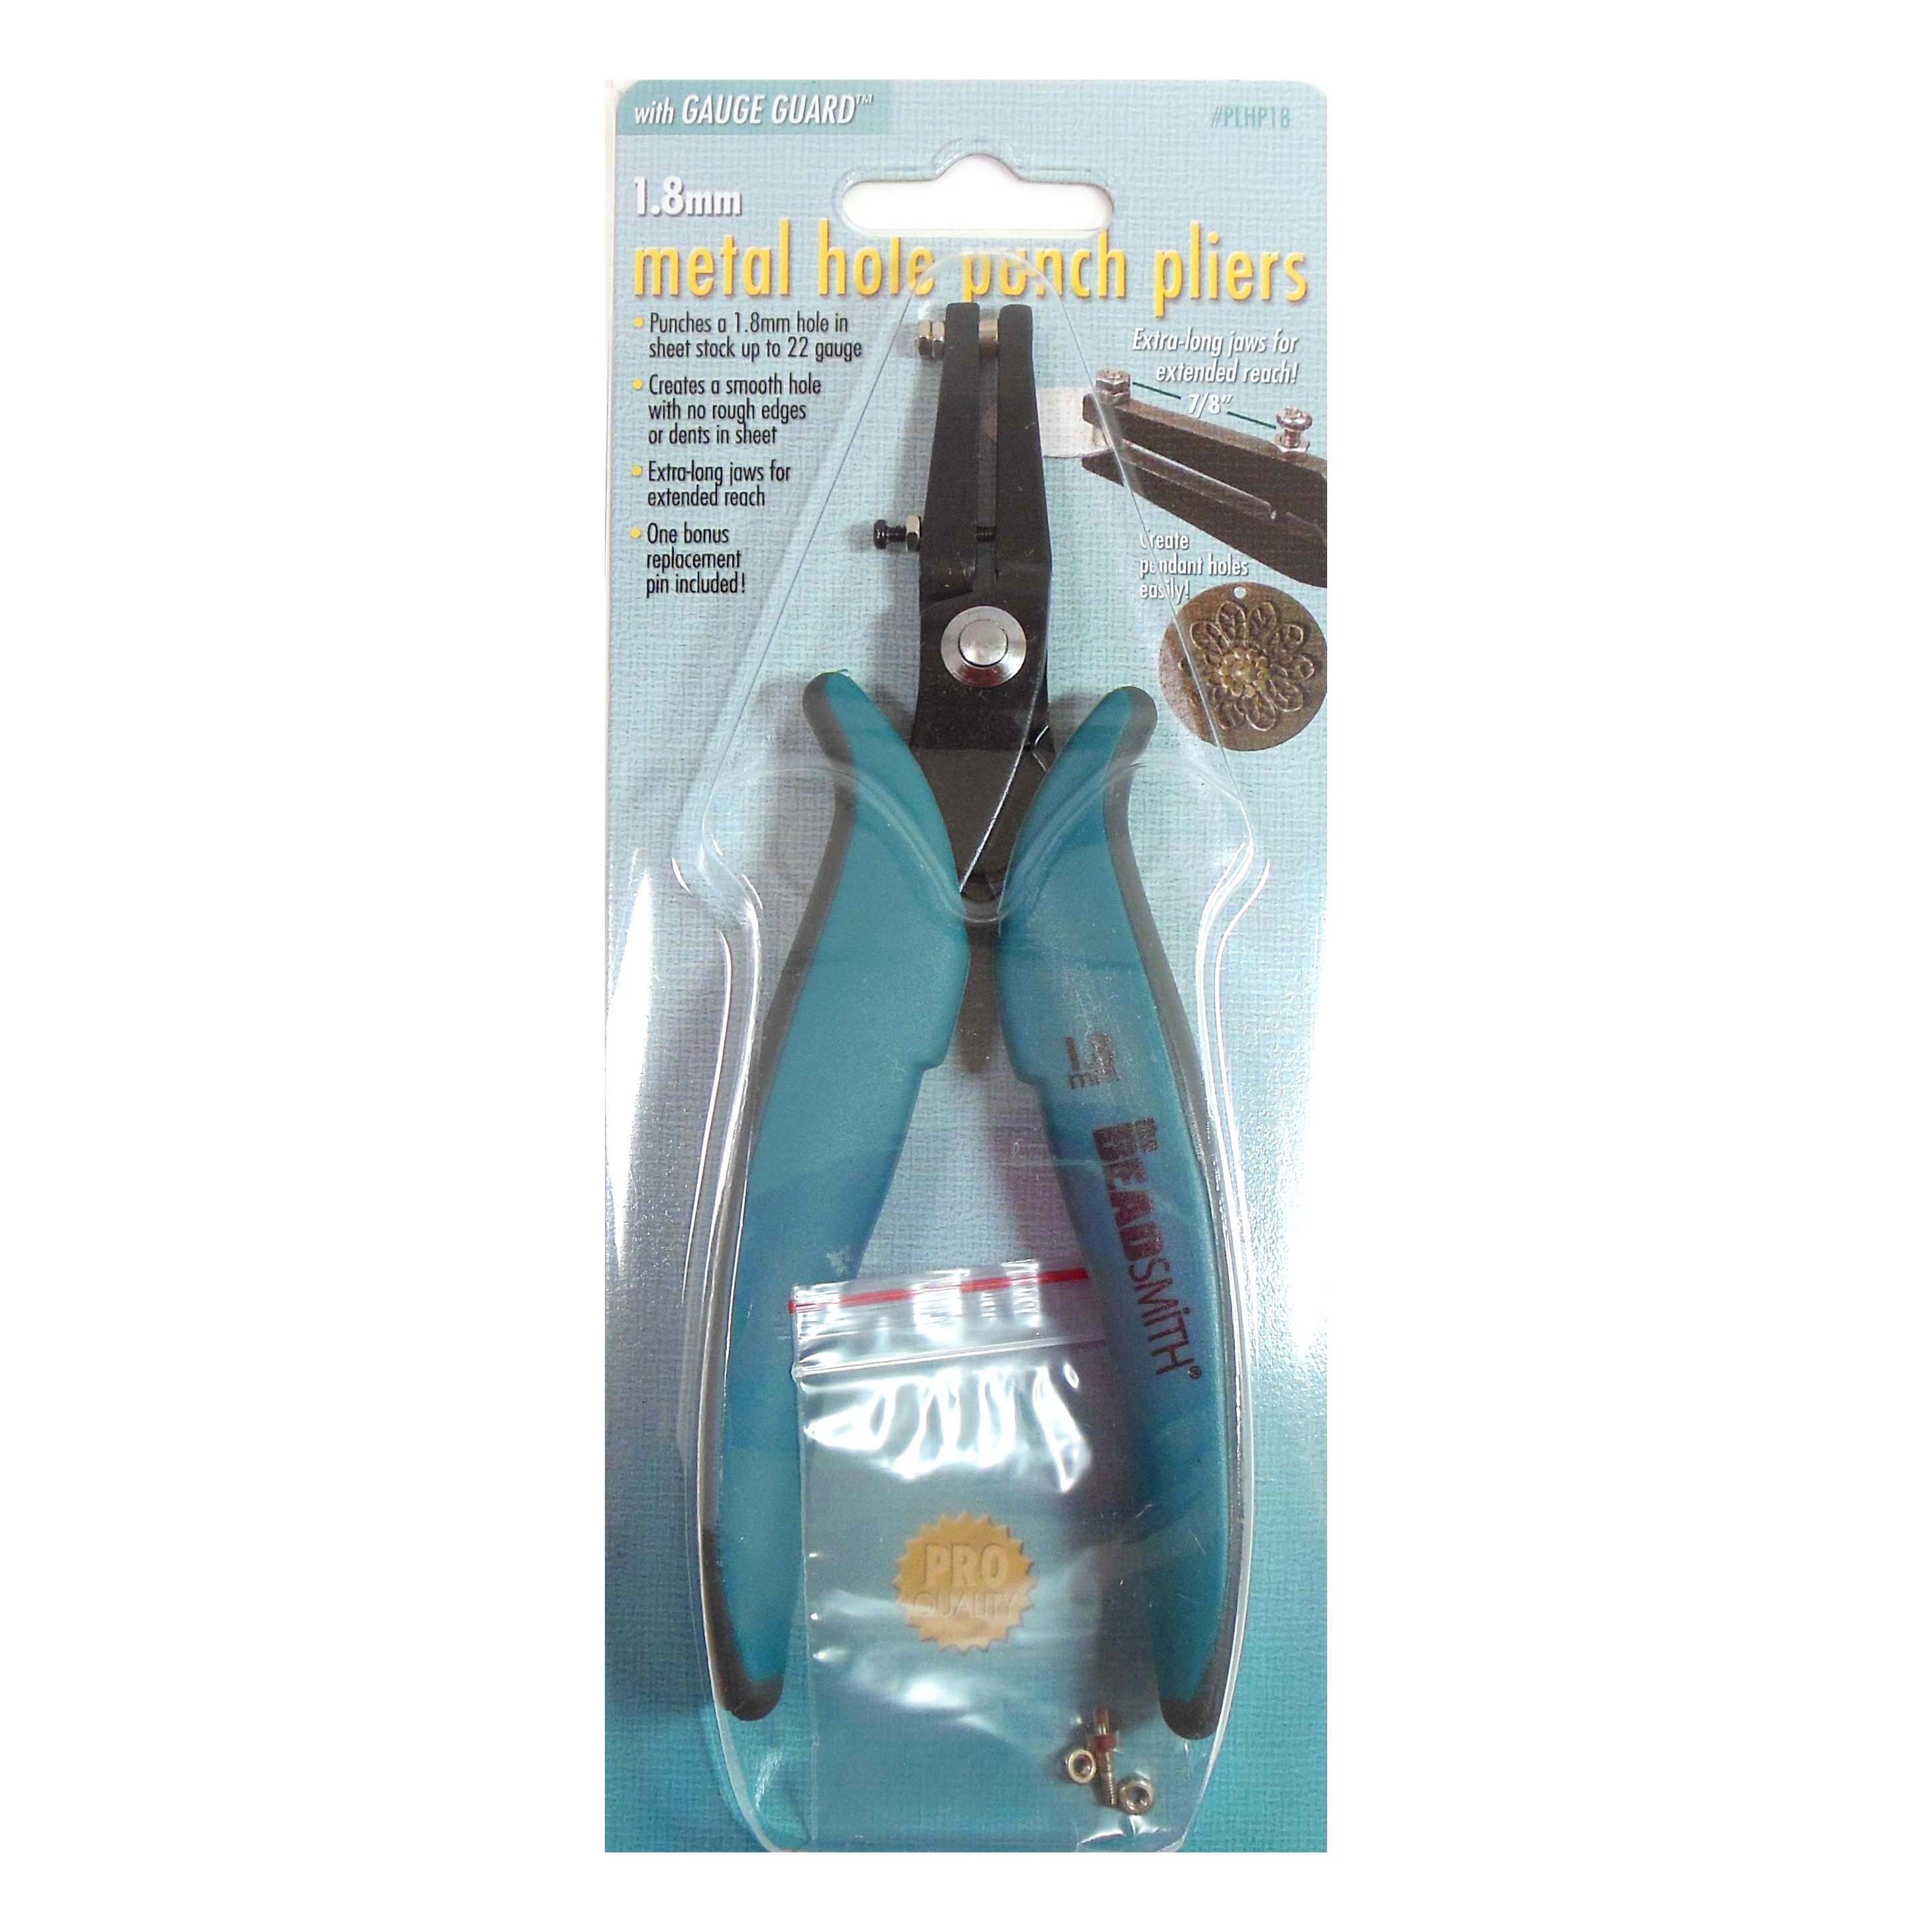 Metal Hole Punch Pliers with Gauge Guard from Beadsmith